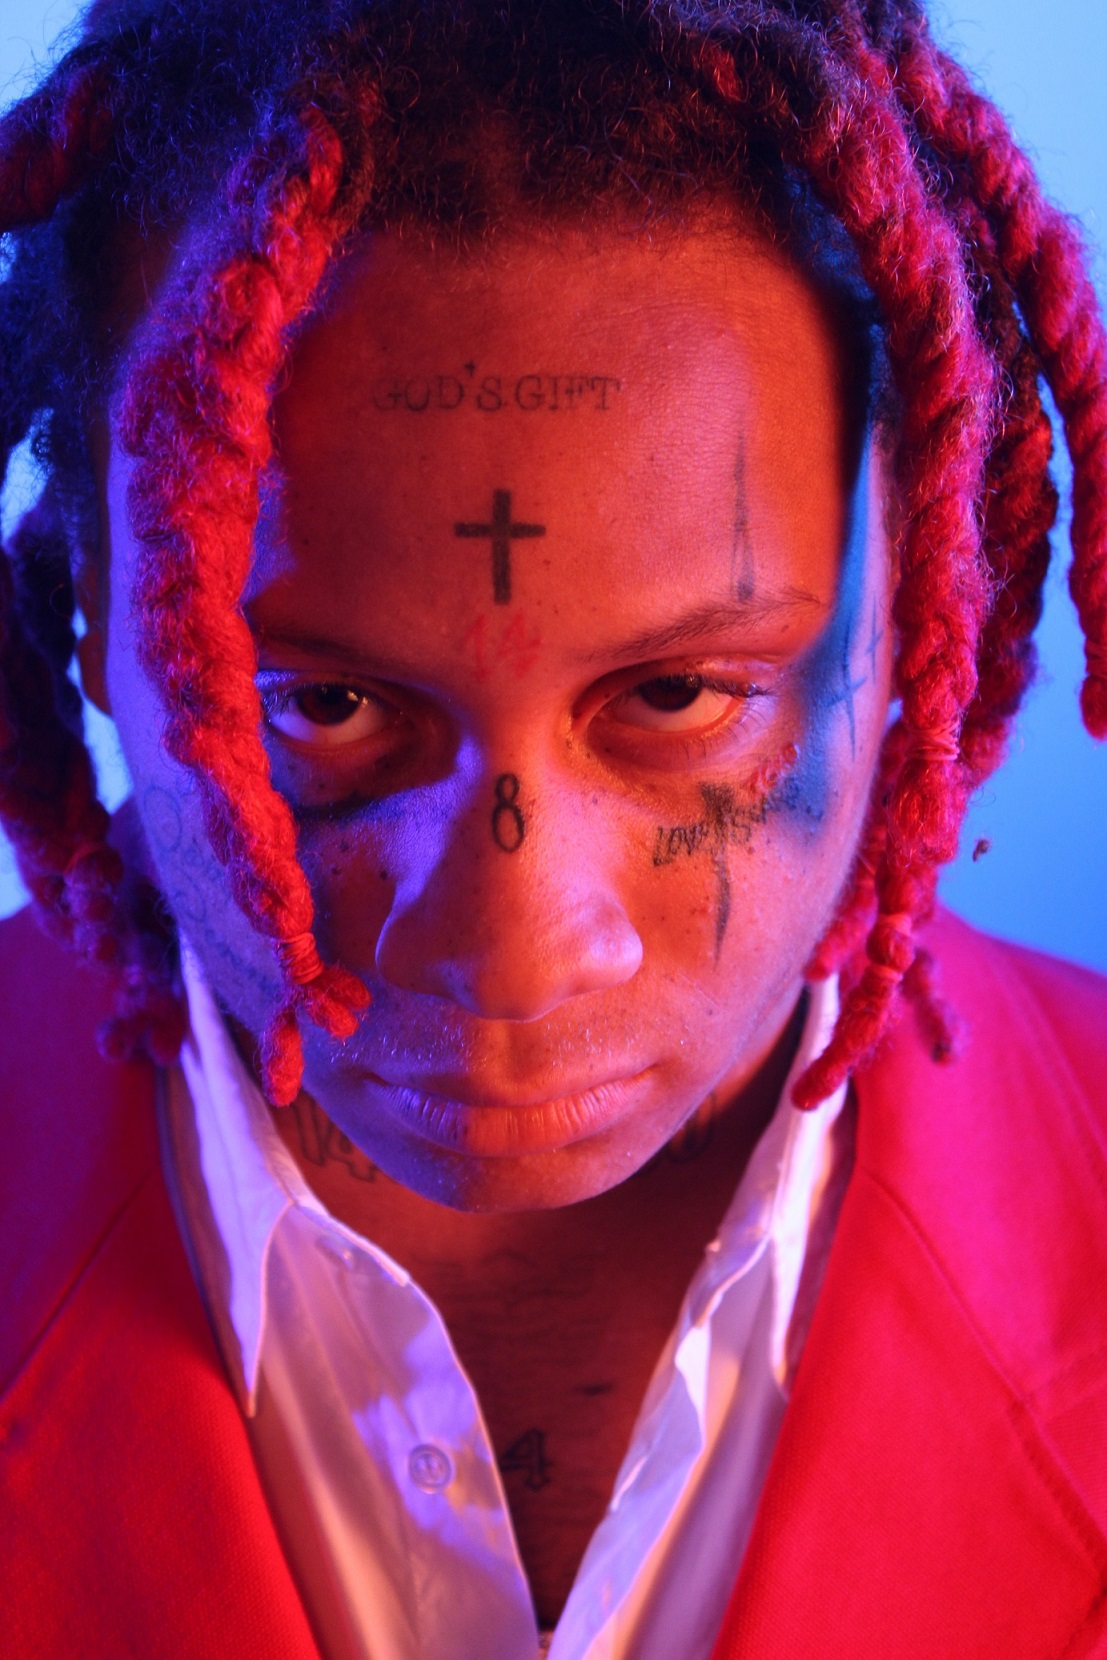 Trippie Redd トリッピー レッド Virgin Music Label Artist Services The Independent Music Distribution And Services Solution